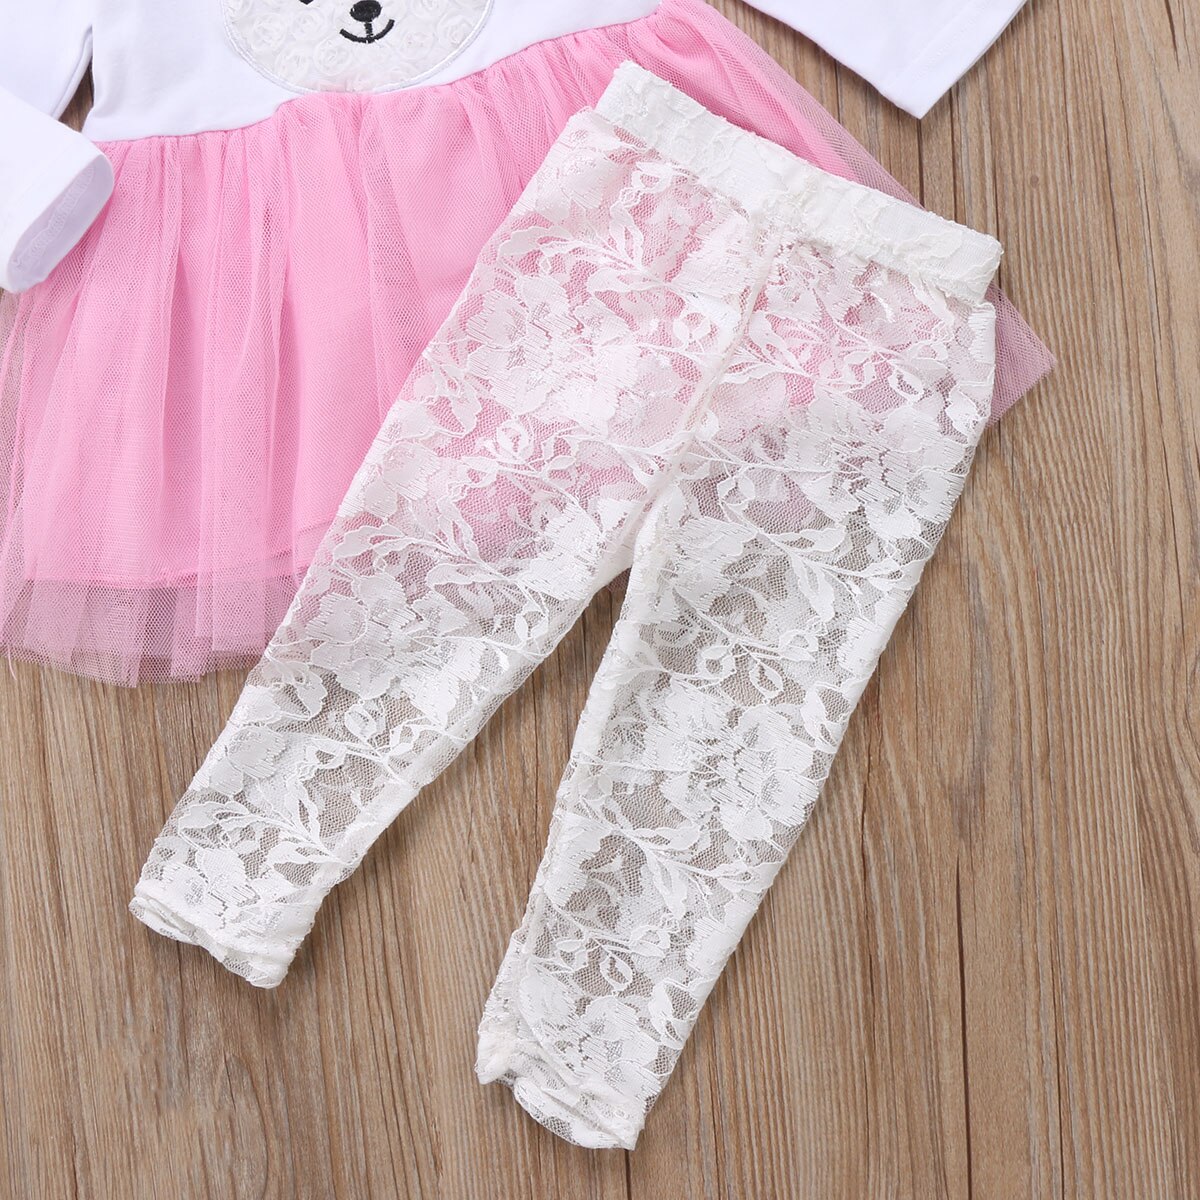 Kids Baby Girls Princess Flower Bunny Lace Shirt Long Sleeve Cotton Cute+Top Pants Outfits Set Clothes - ebowsos